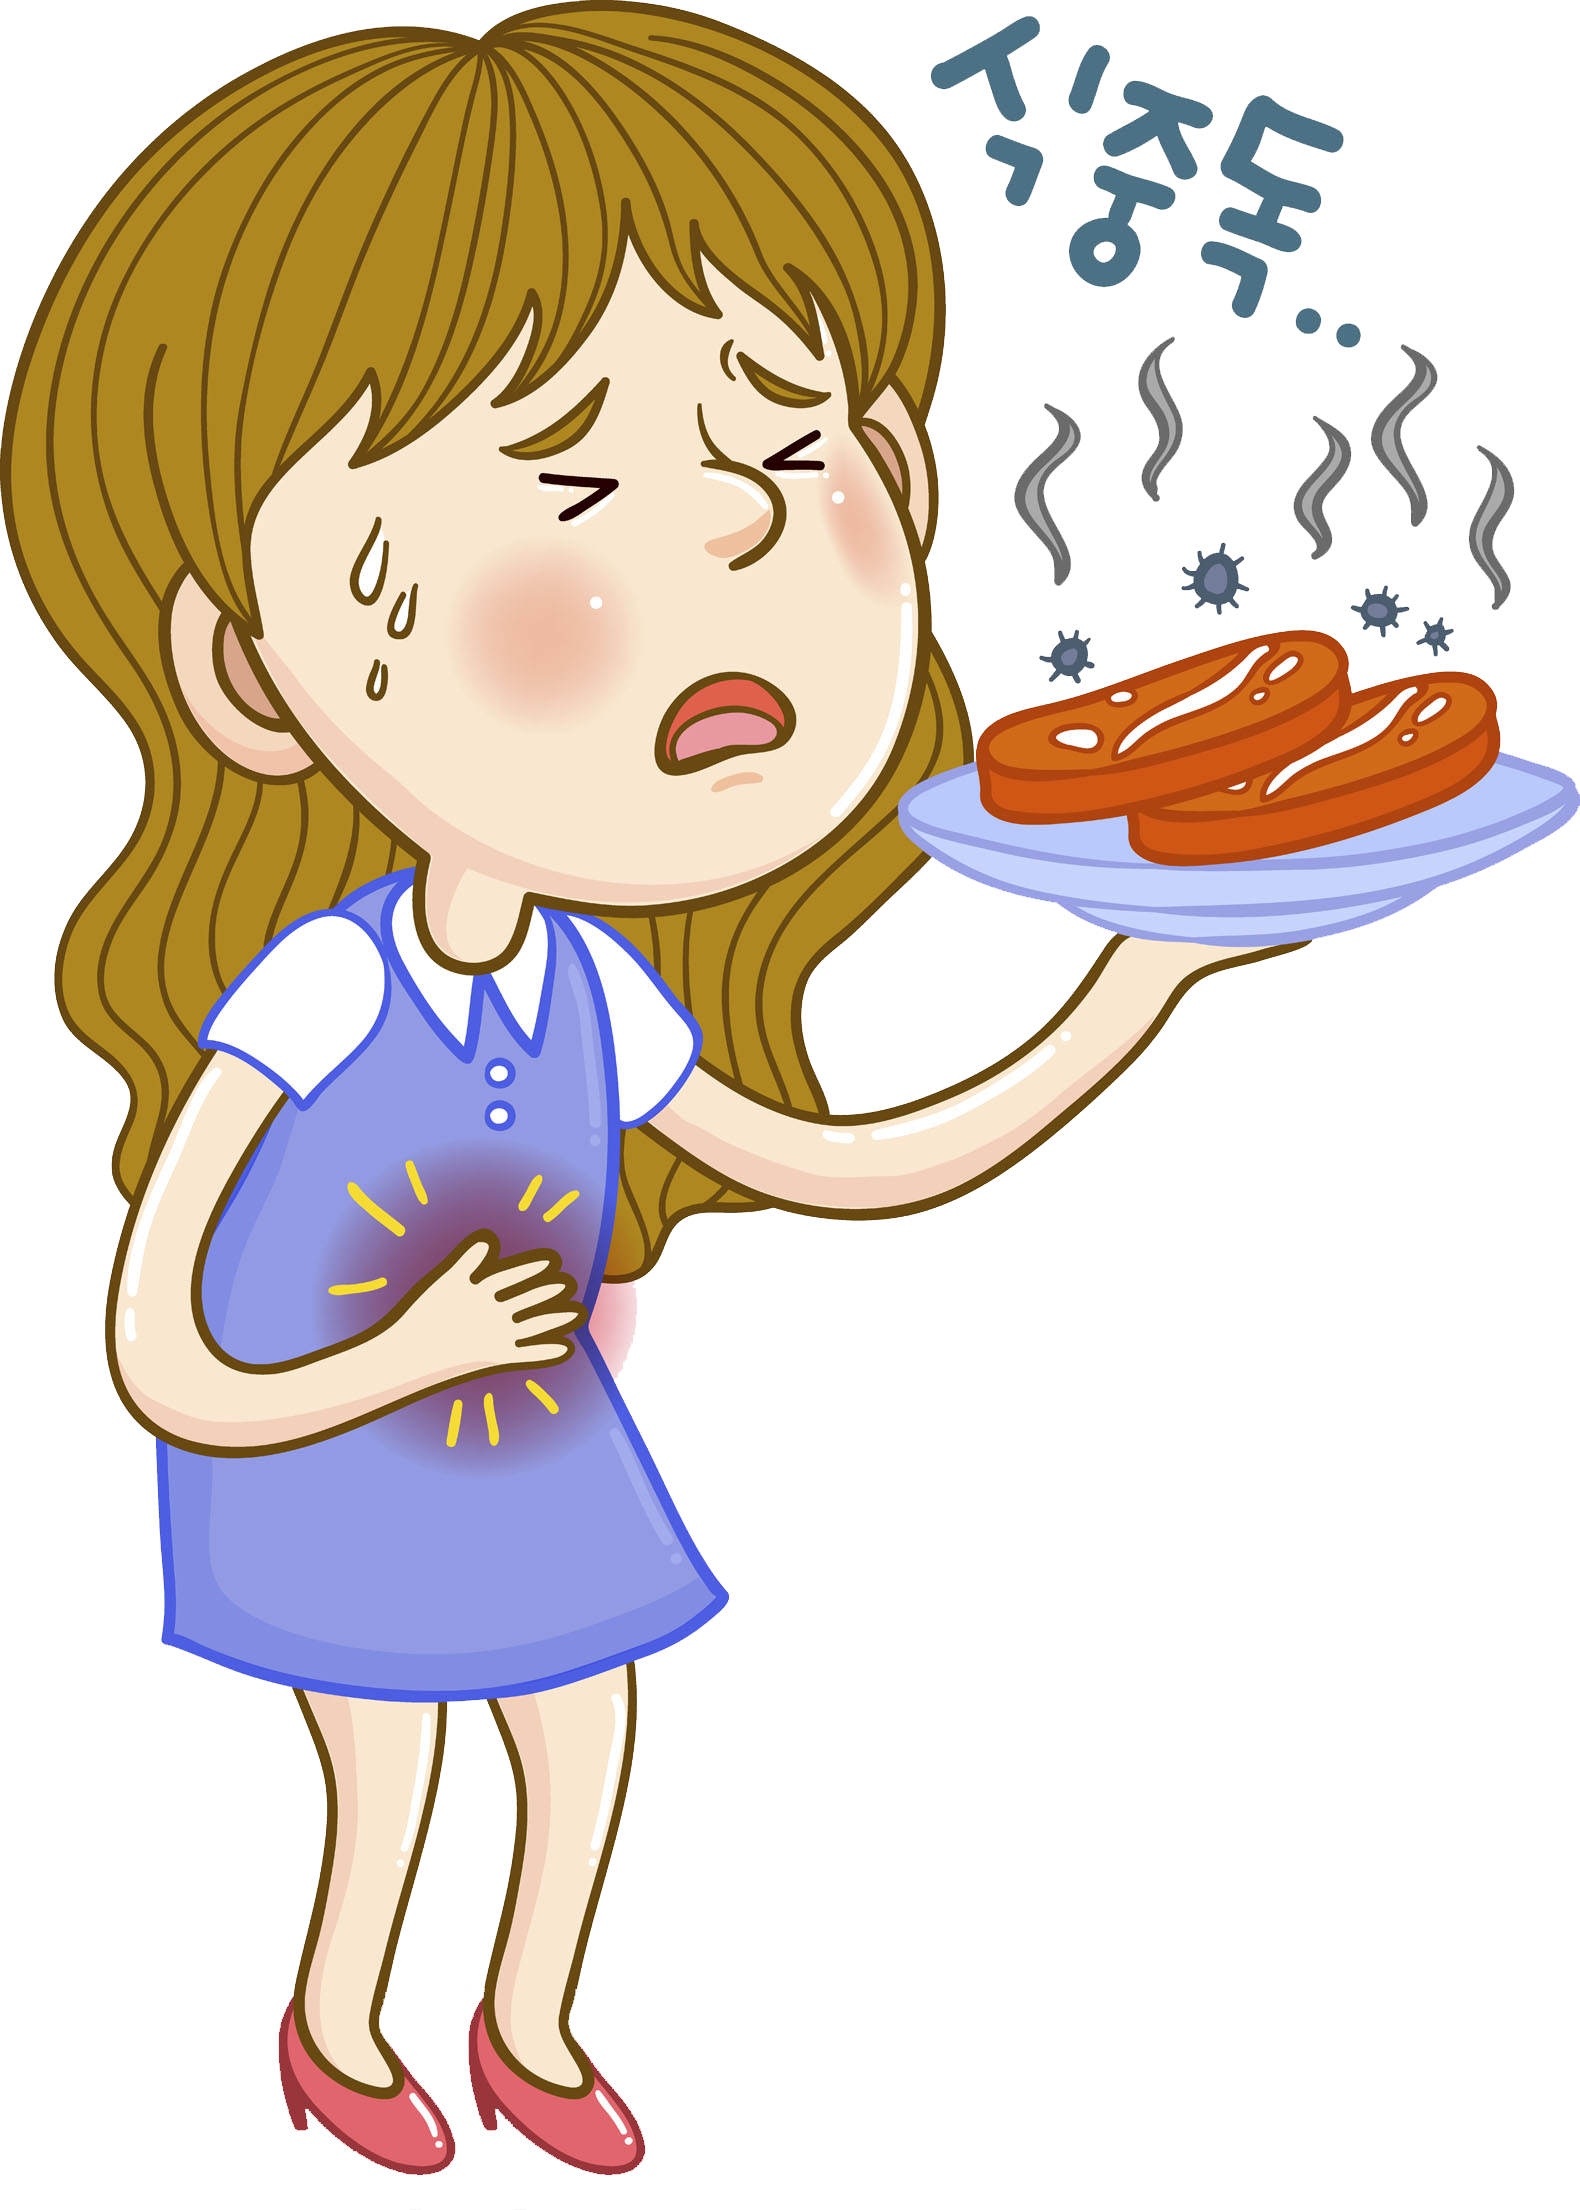 hungry clipart stomach hurt